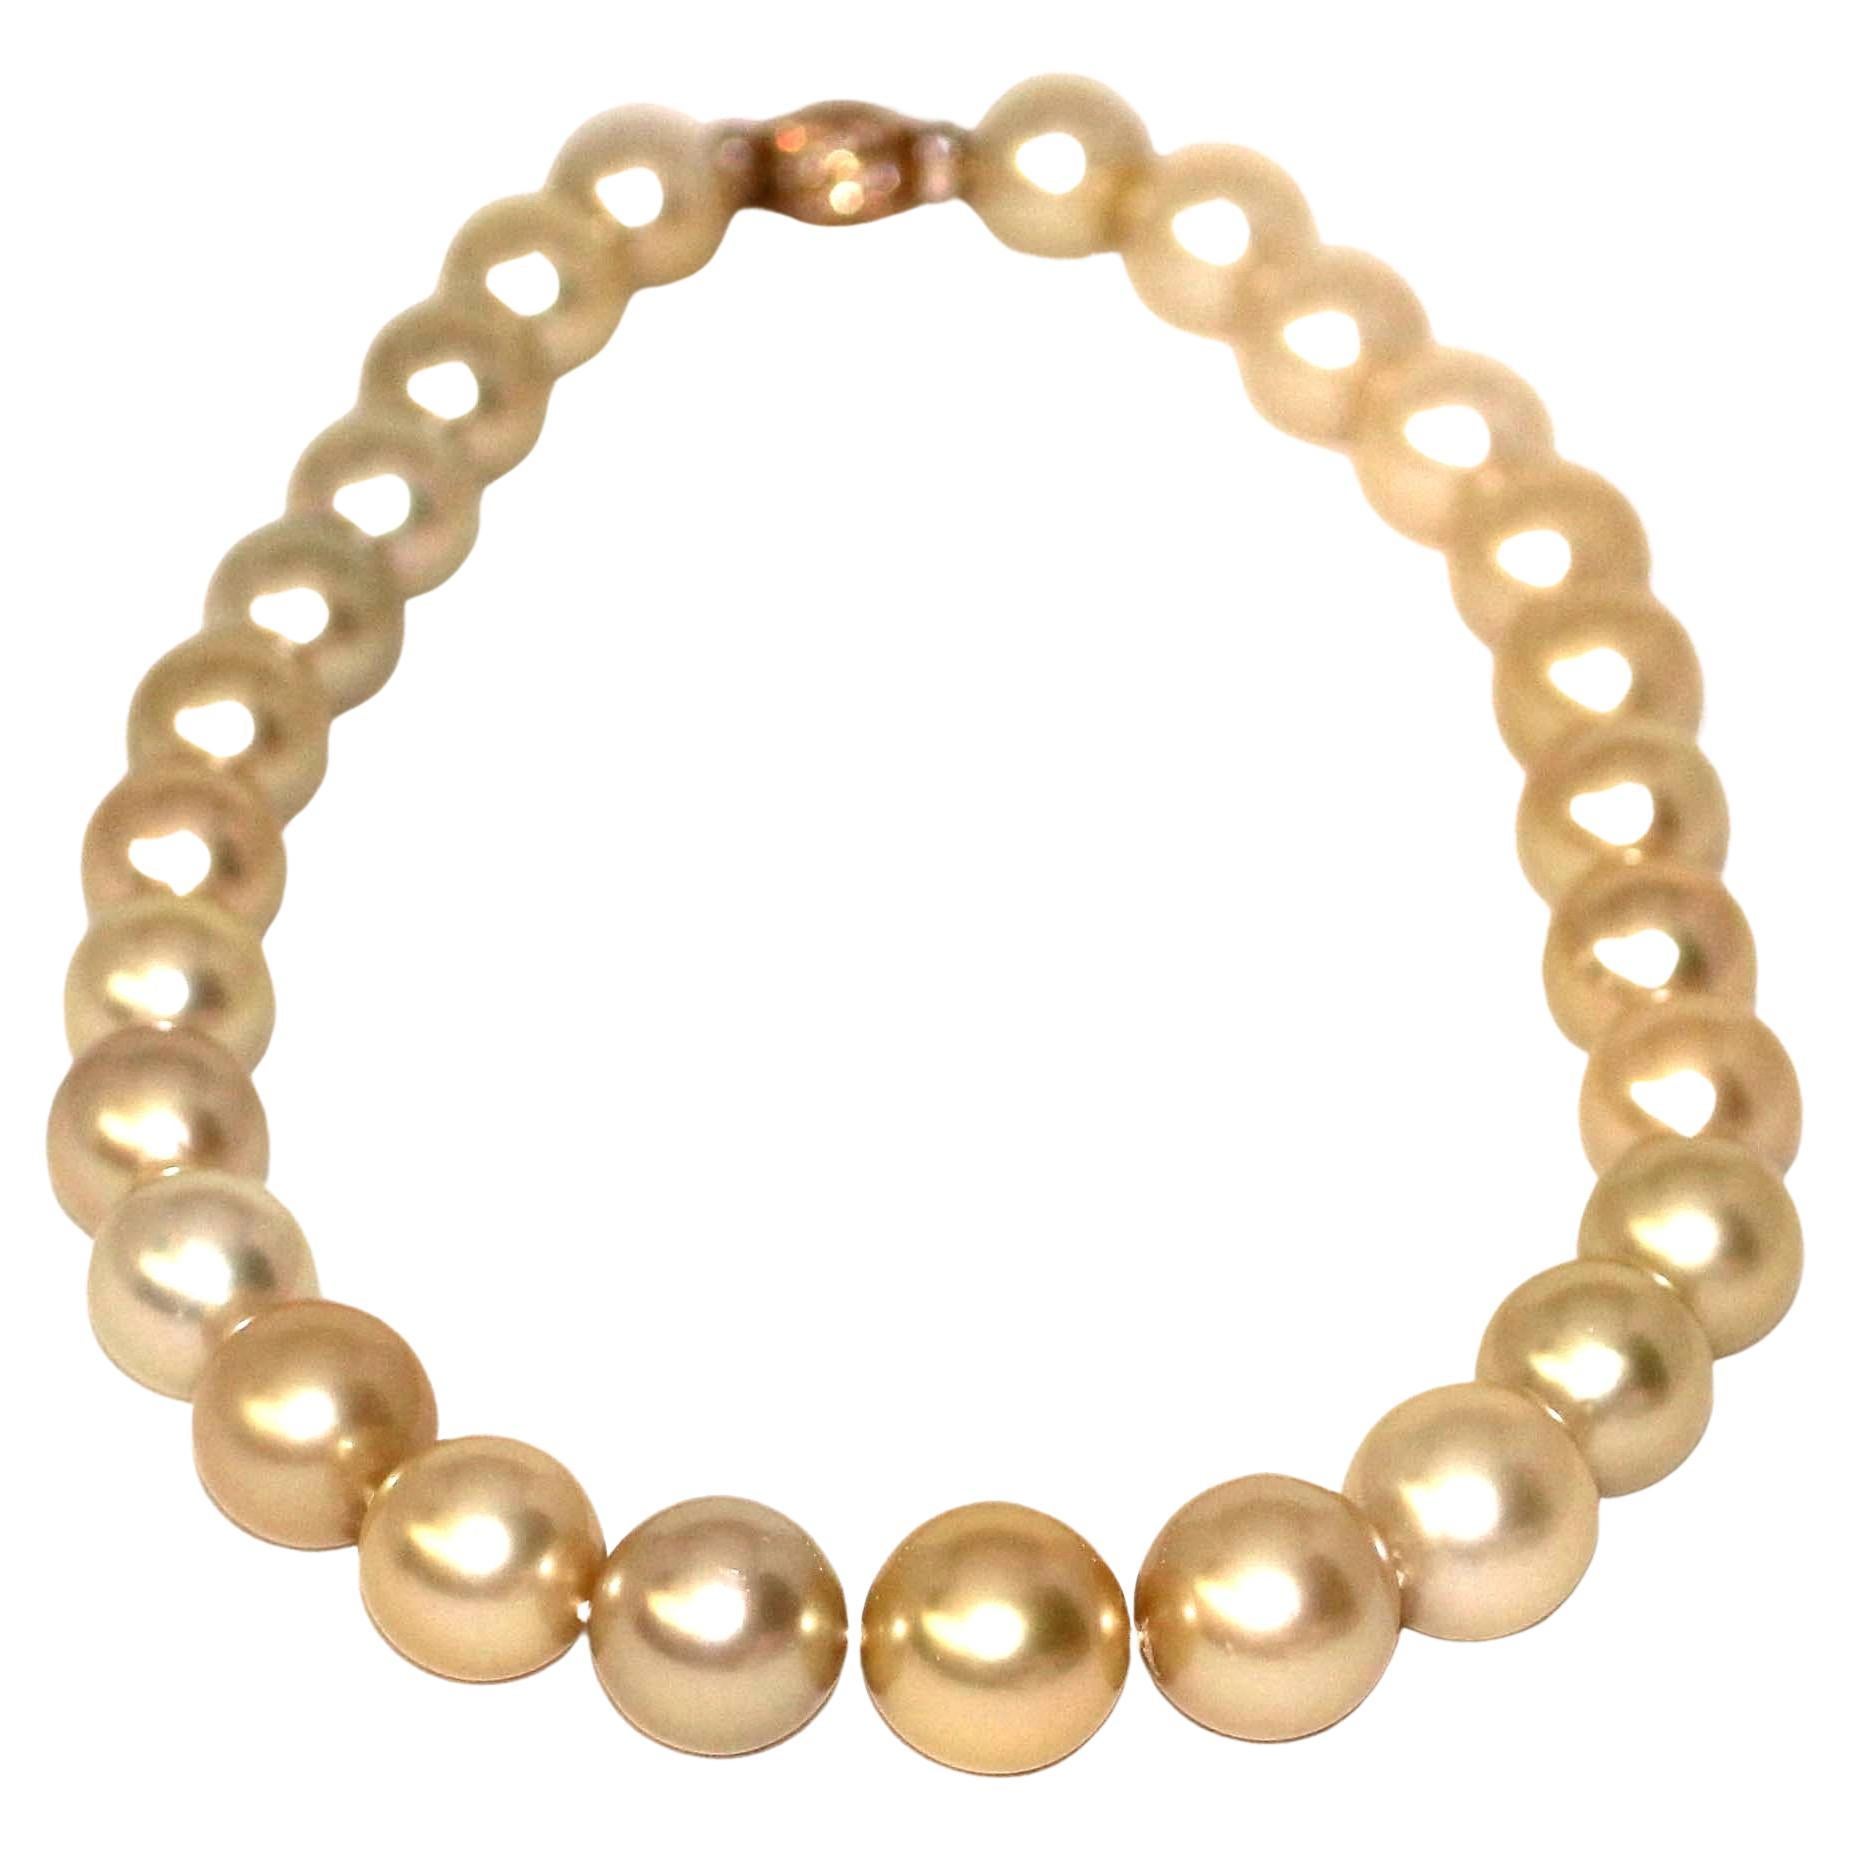 Bead Hakimoto 16x13mm Natural color Golden South Sea Pearl Necklace 18K Diamond Clasp For Sale